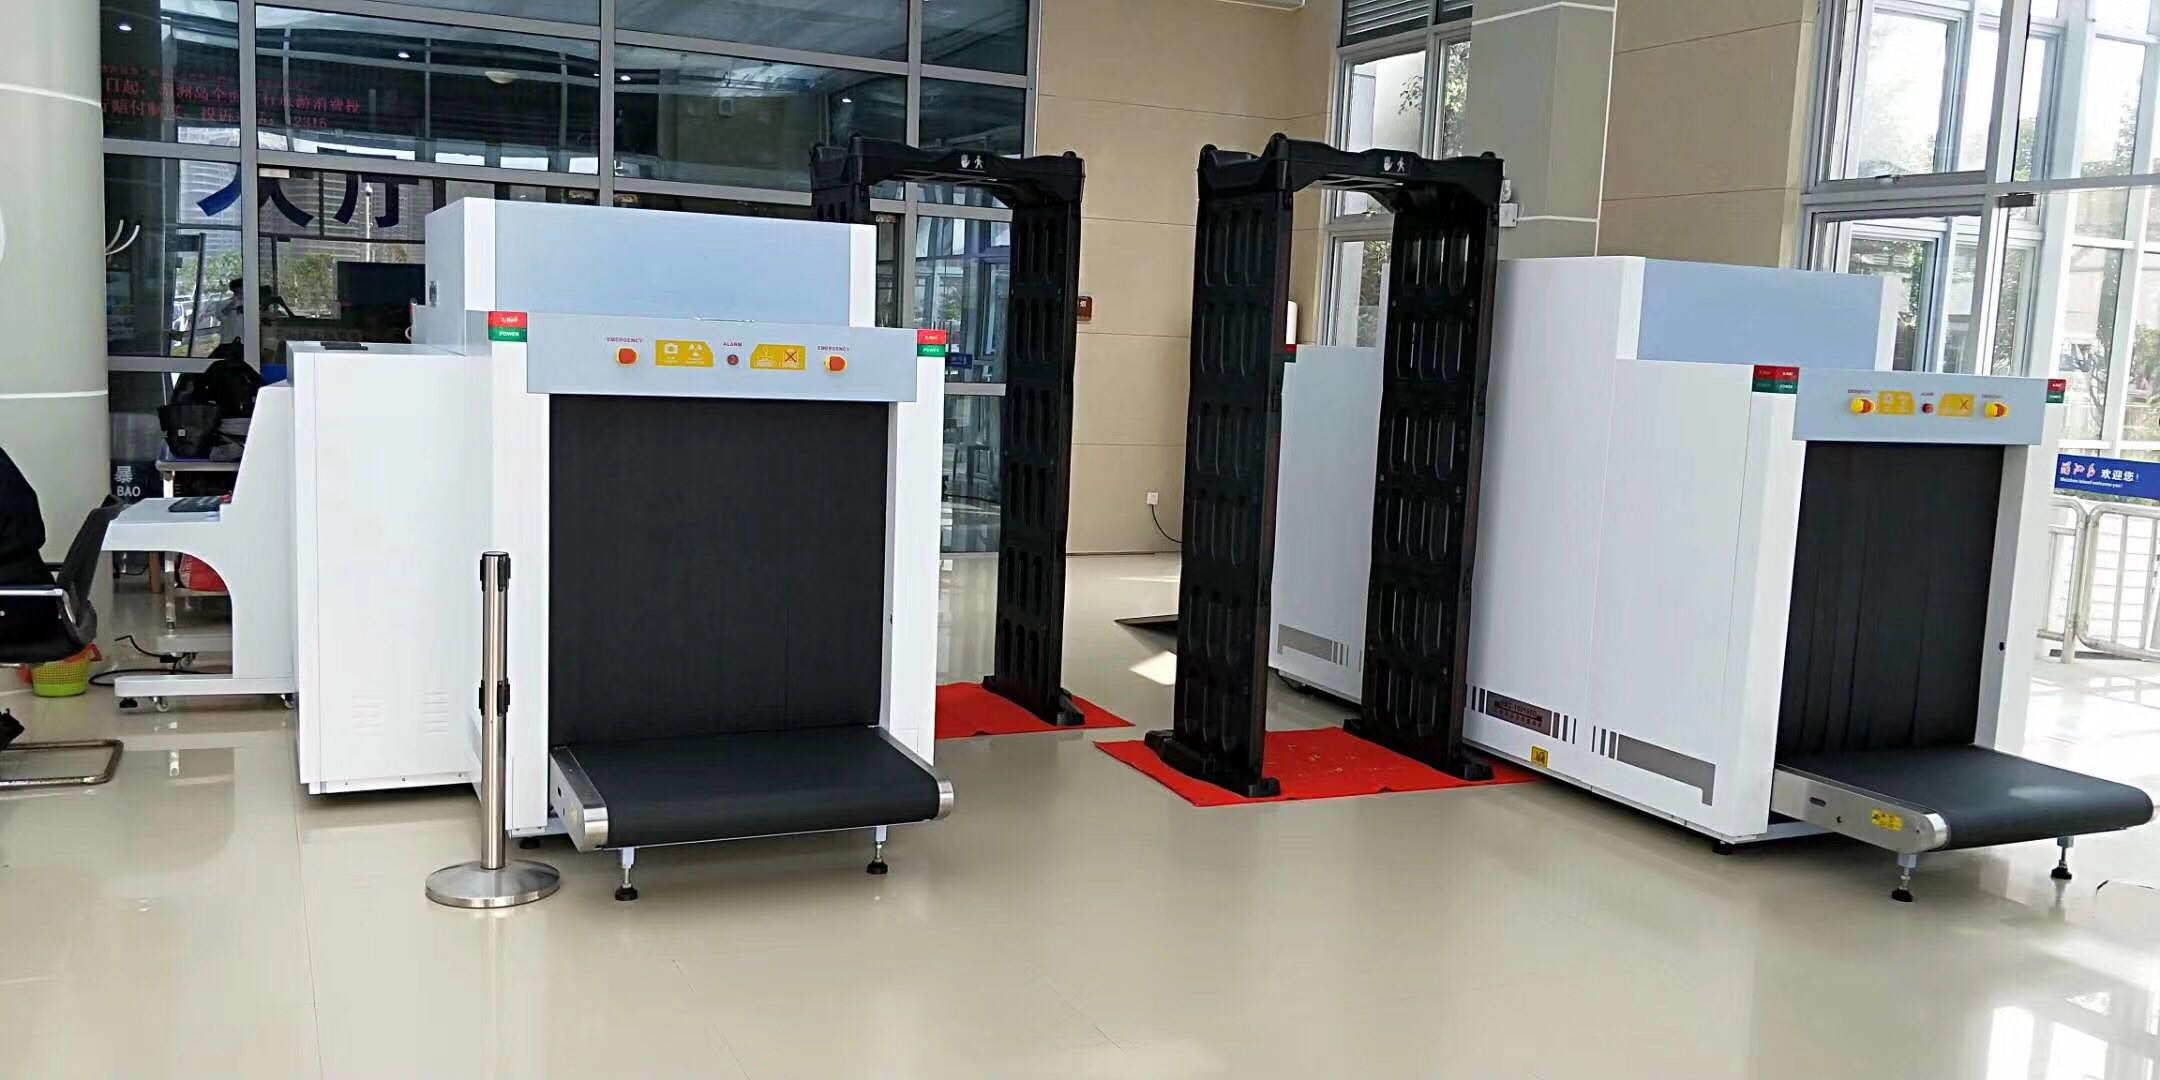 Dual View Security X-ray Machine at Airport with Two 160kv X Ray Generator